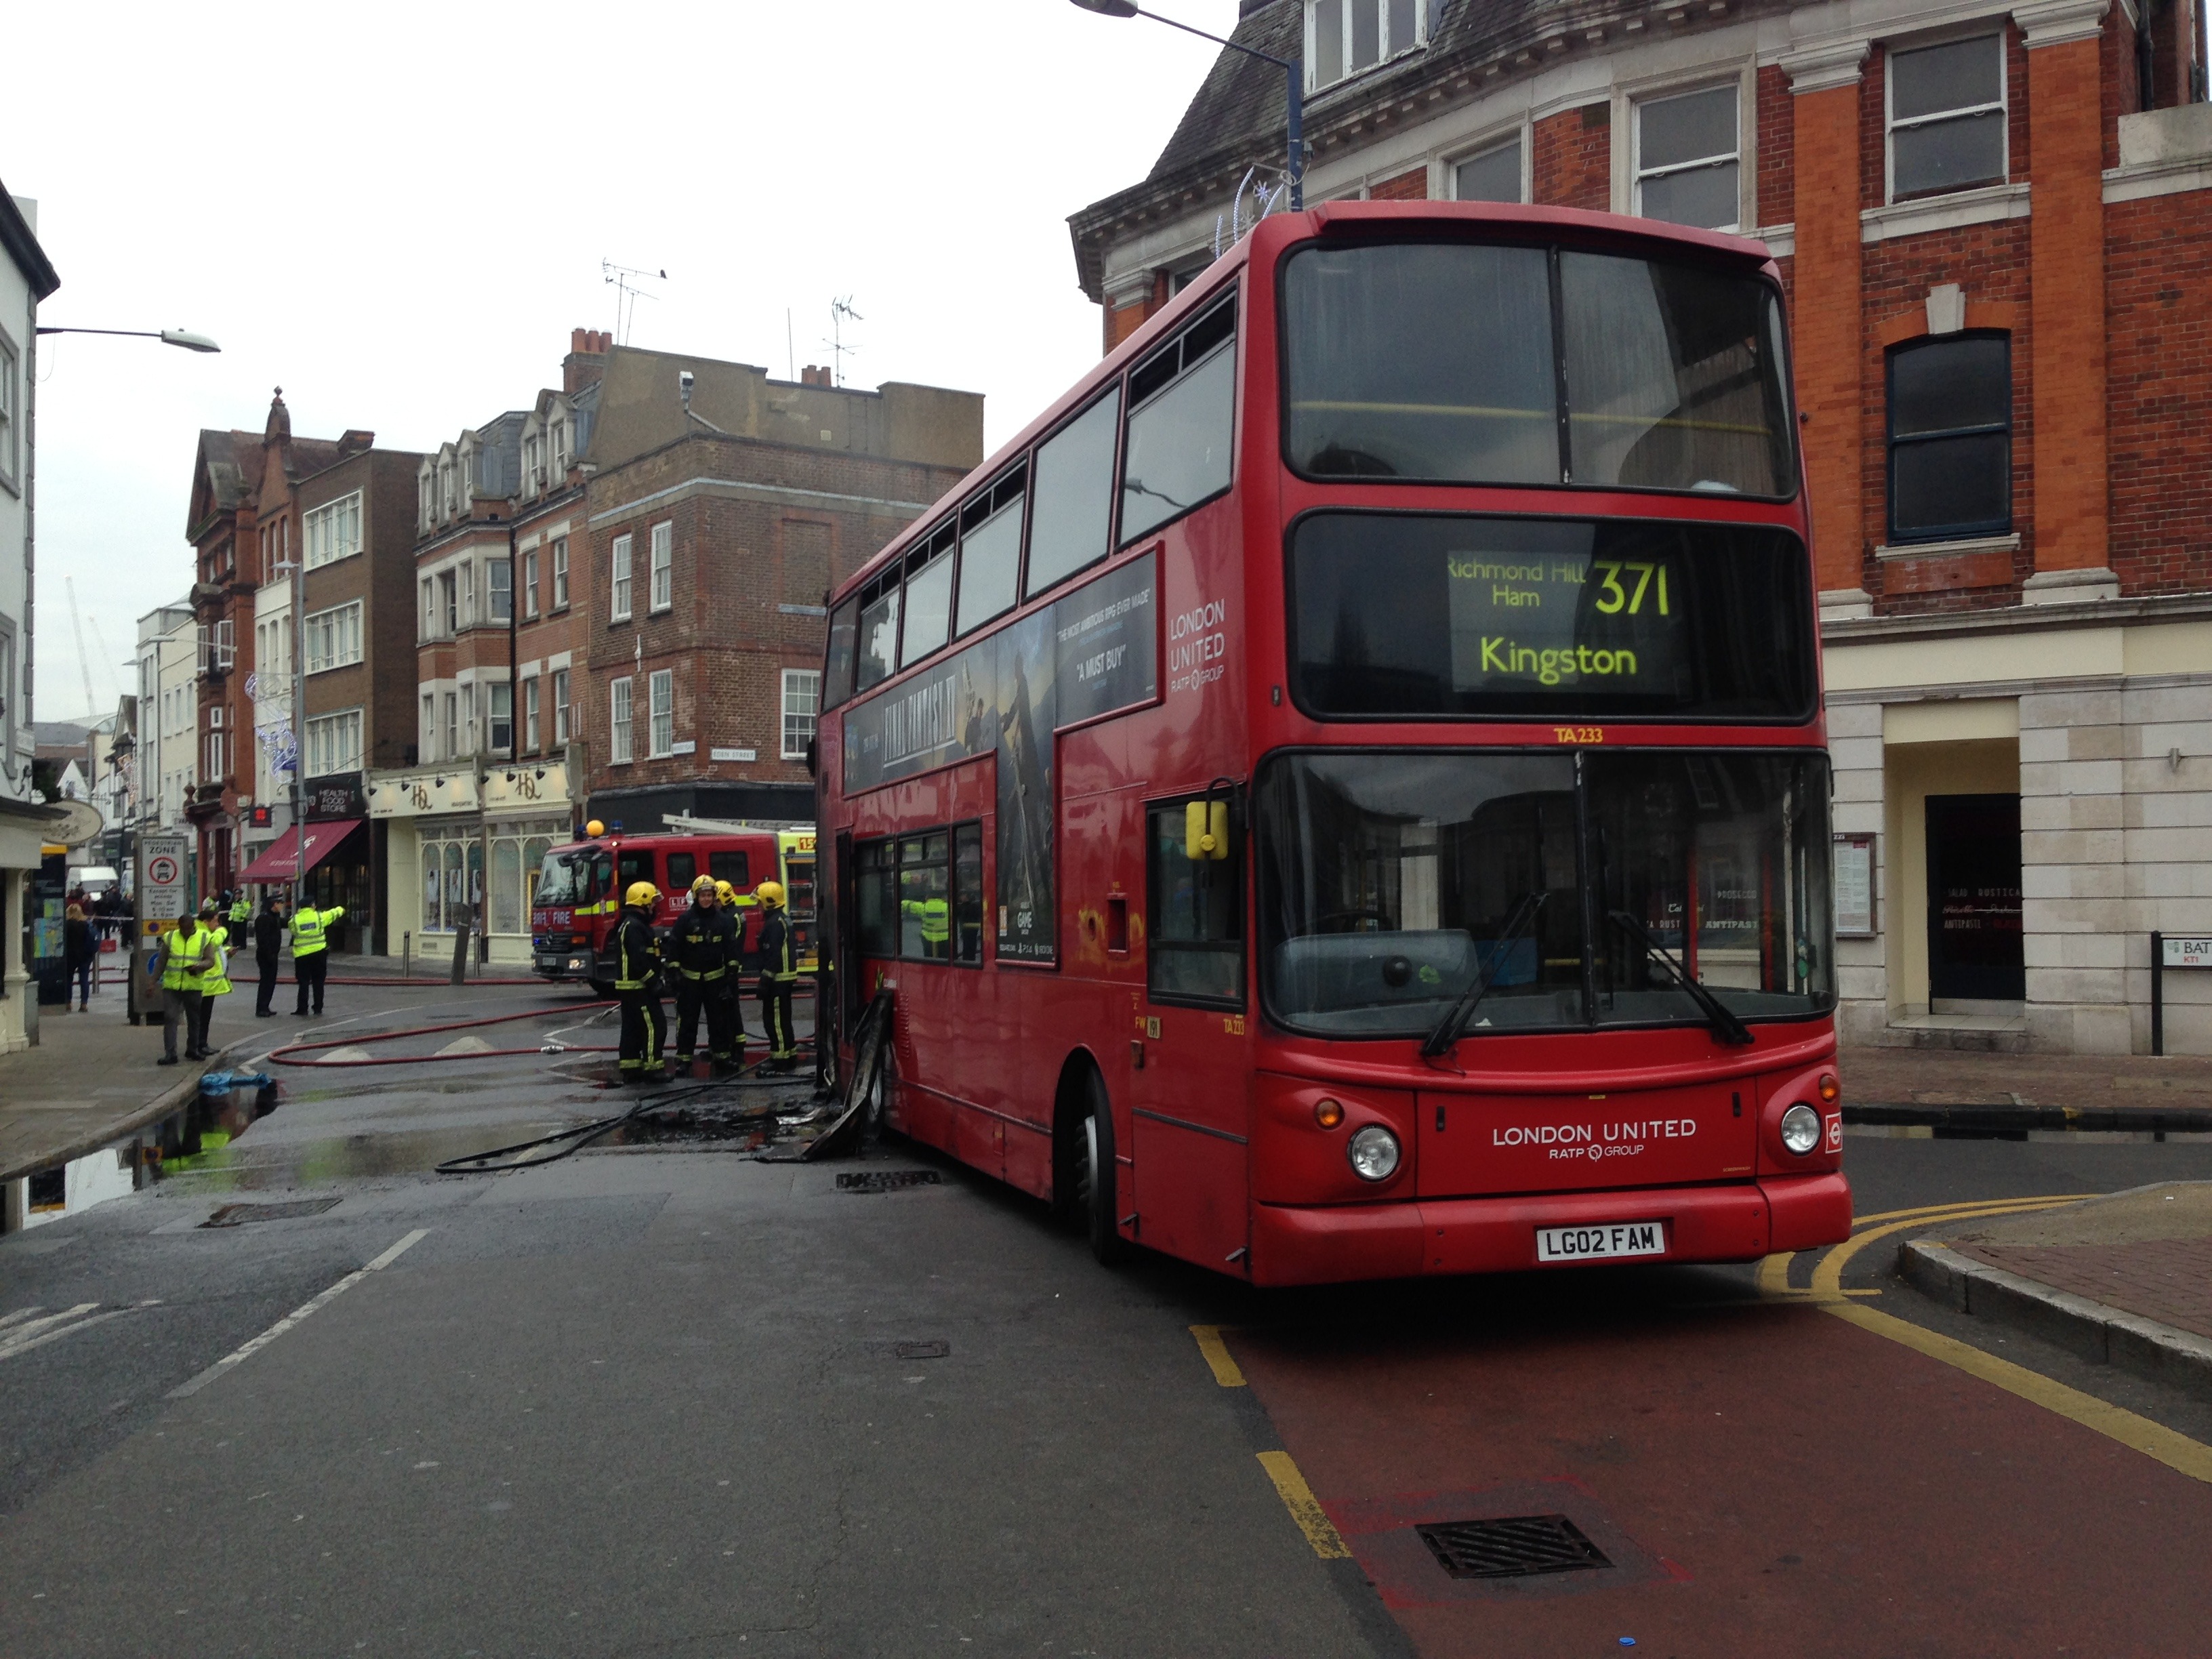 London bus catches on fire in the middle of Kingston High Street